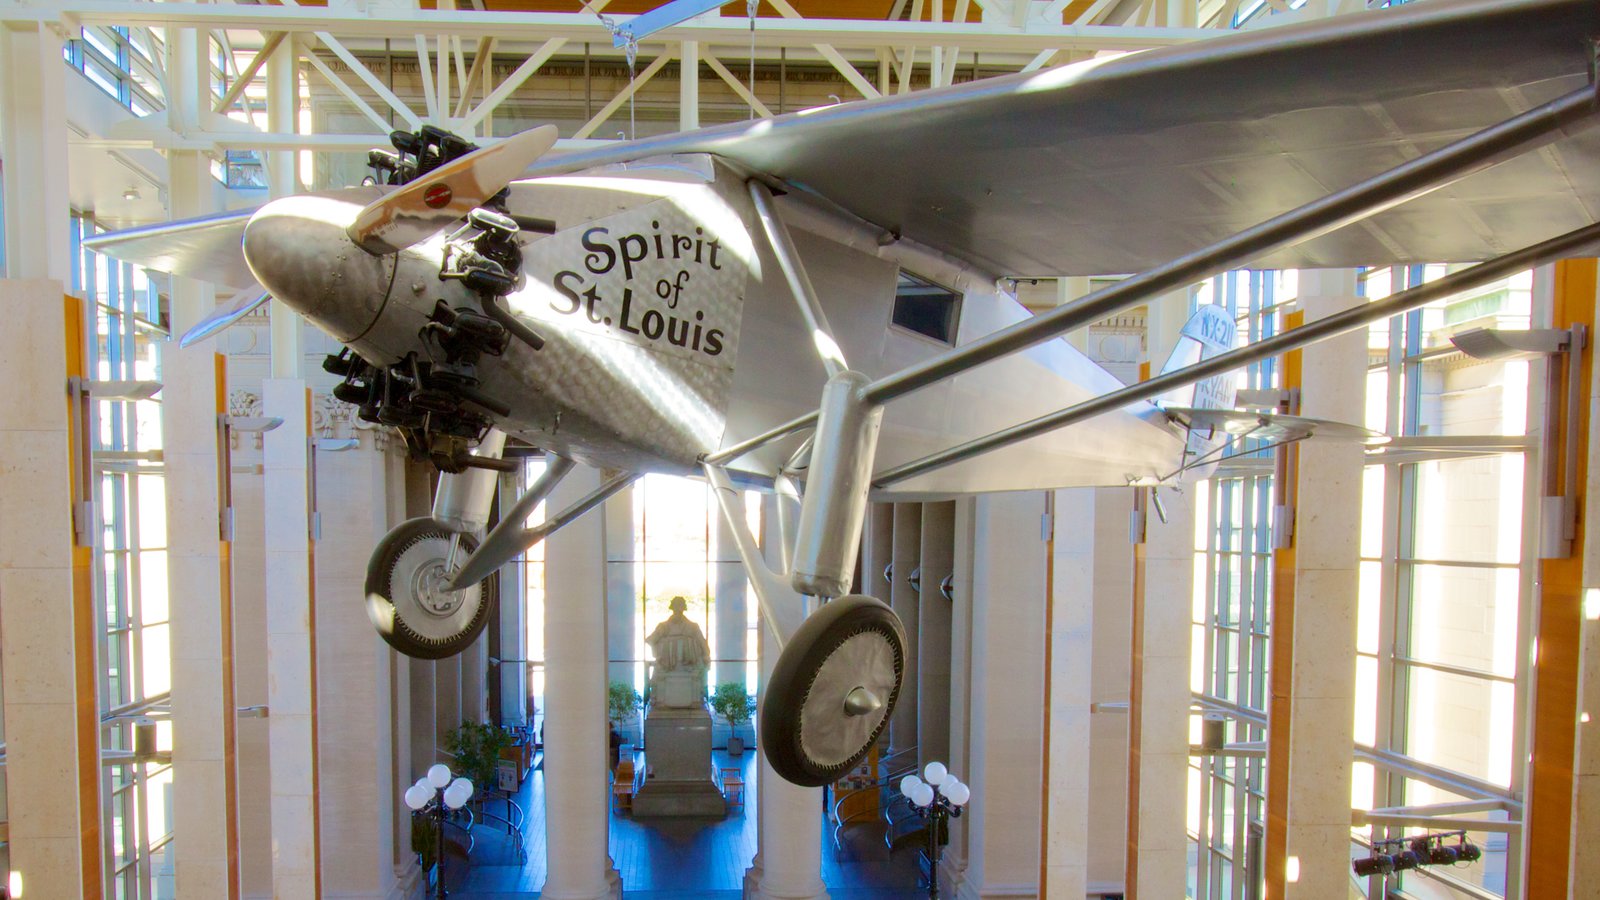 Missouri History Museum which includes aircraft and interior views